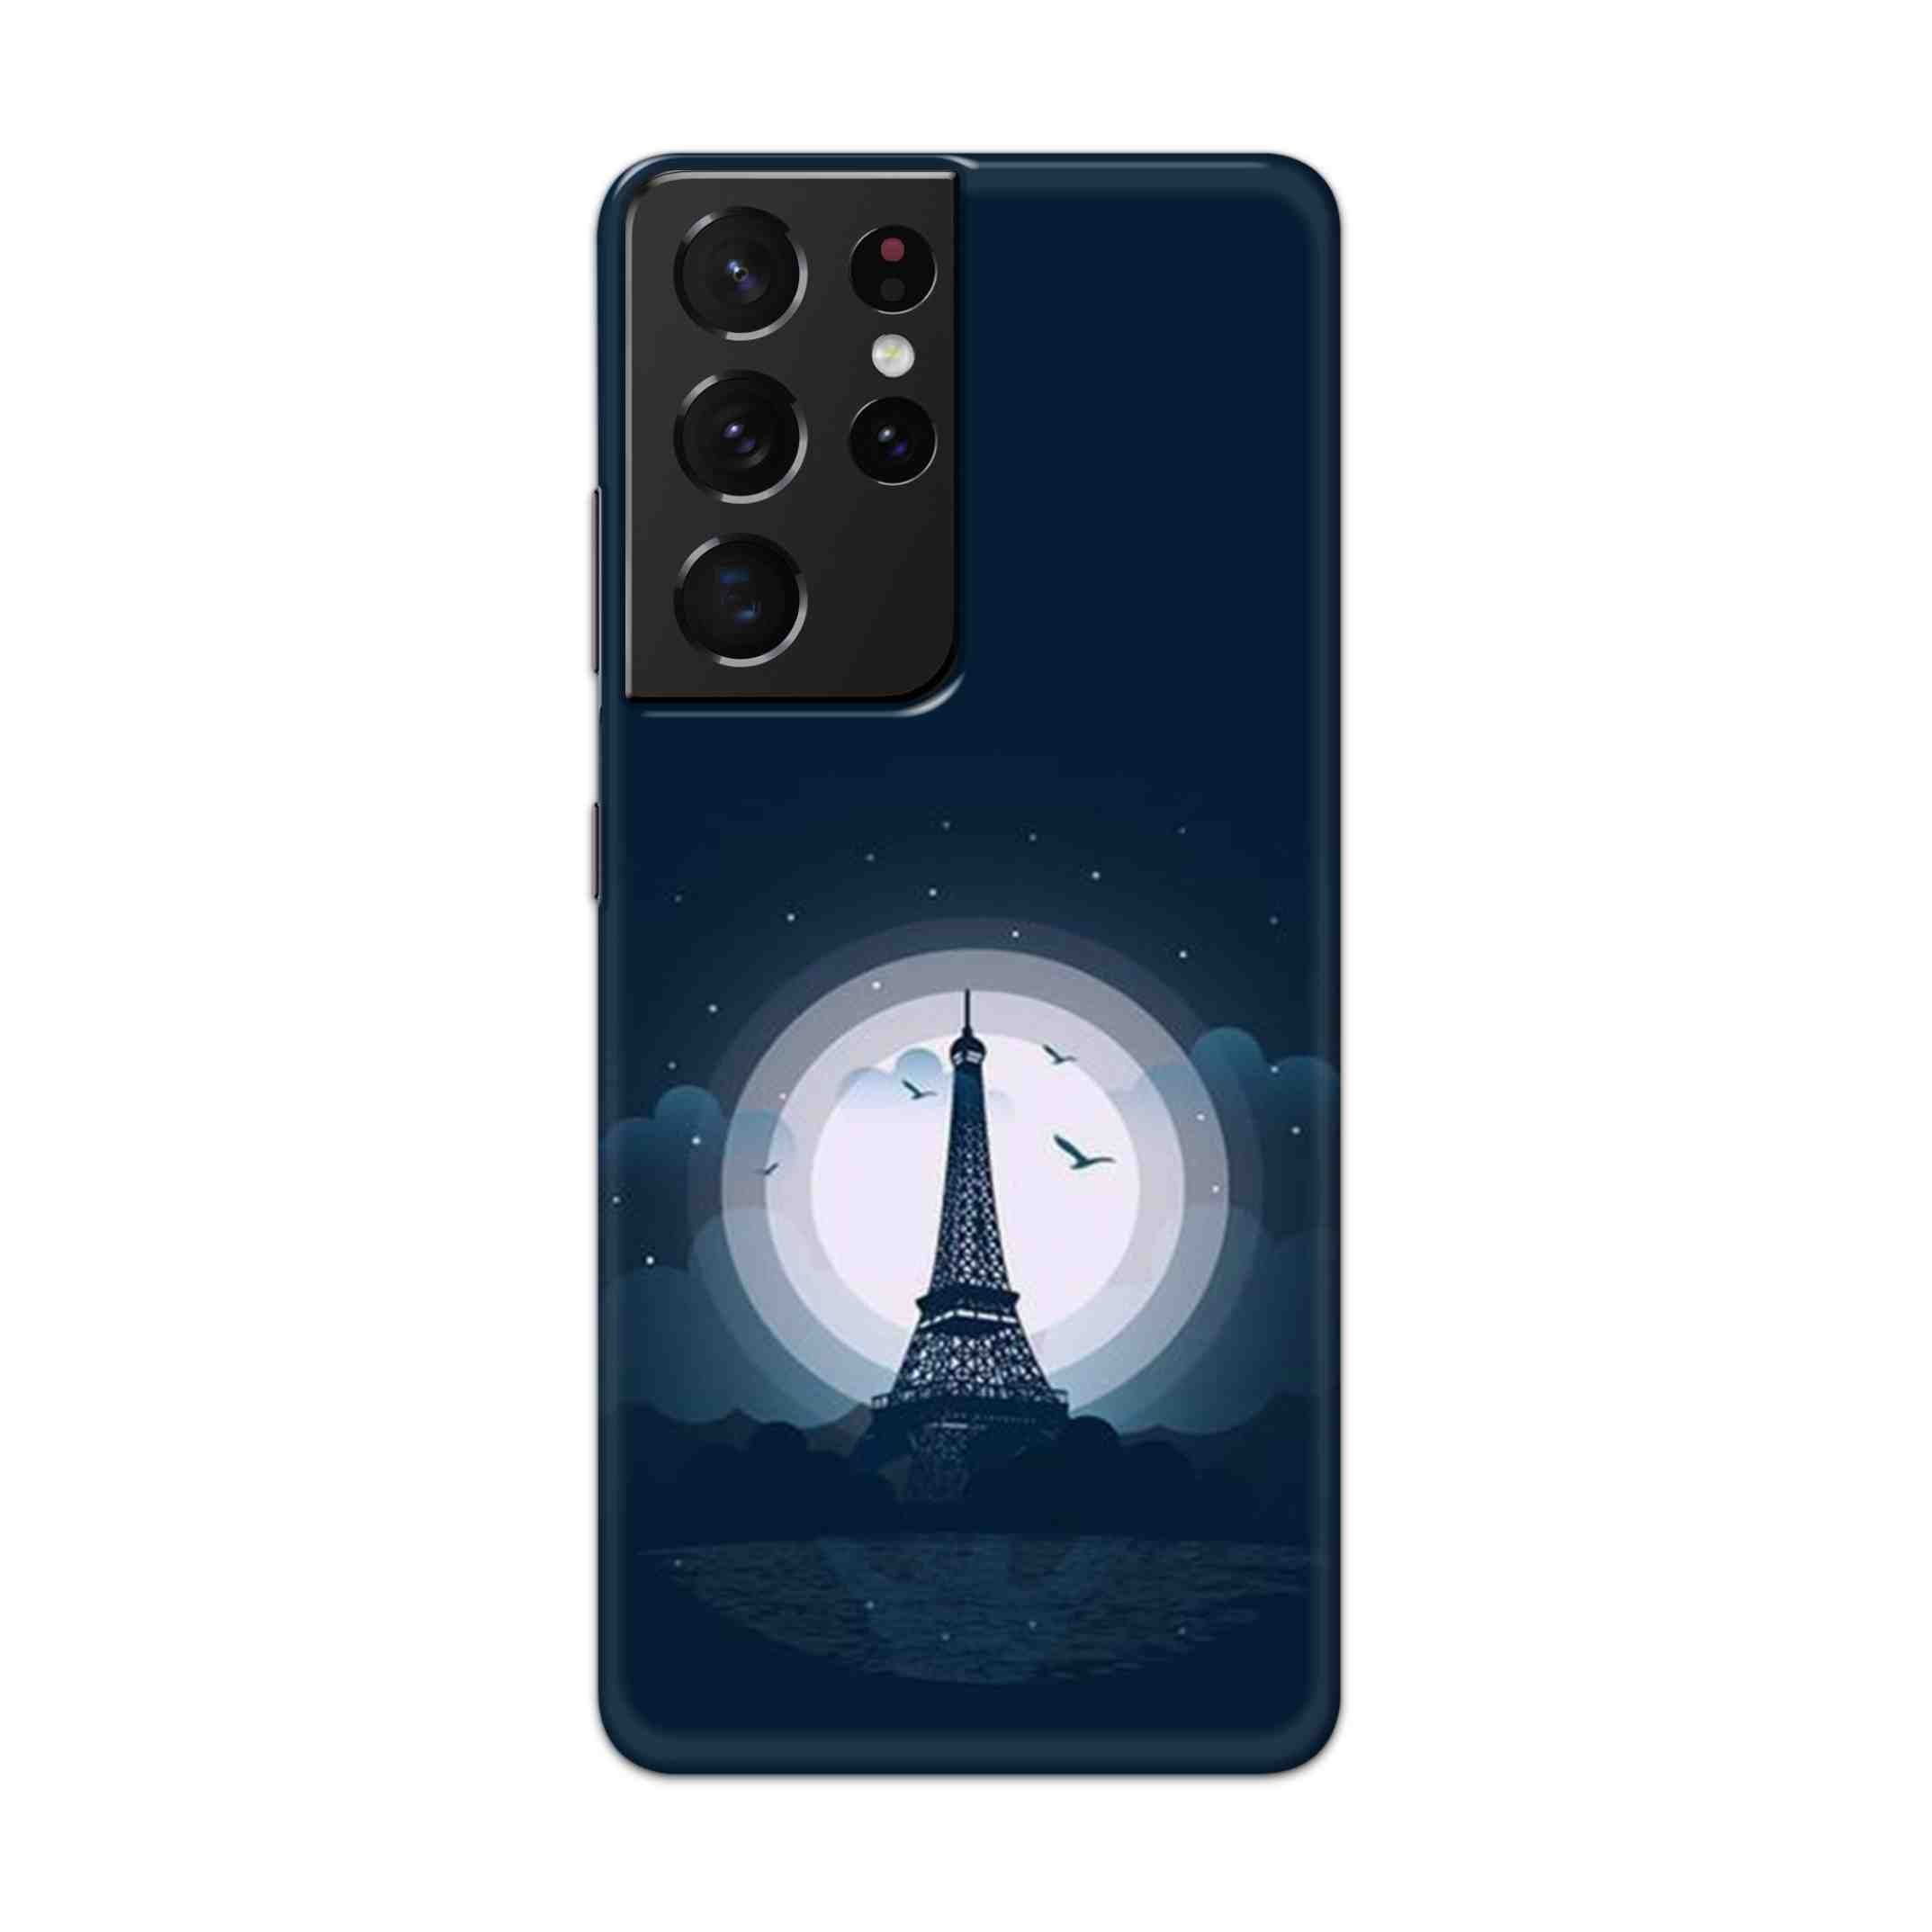 Buy Paris Eiffel Tower Hard Back Mobile Phone Case Cover For Samsung Galaxy S21 Ultra Online